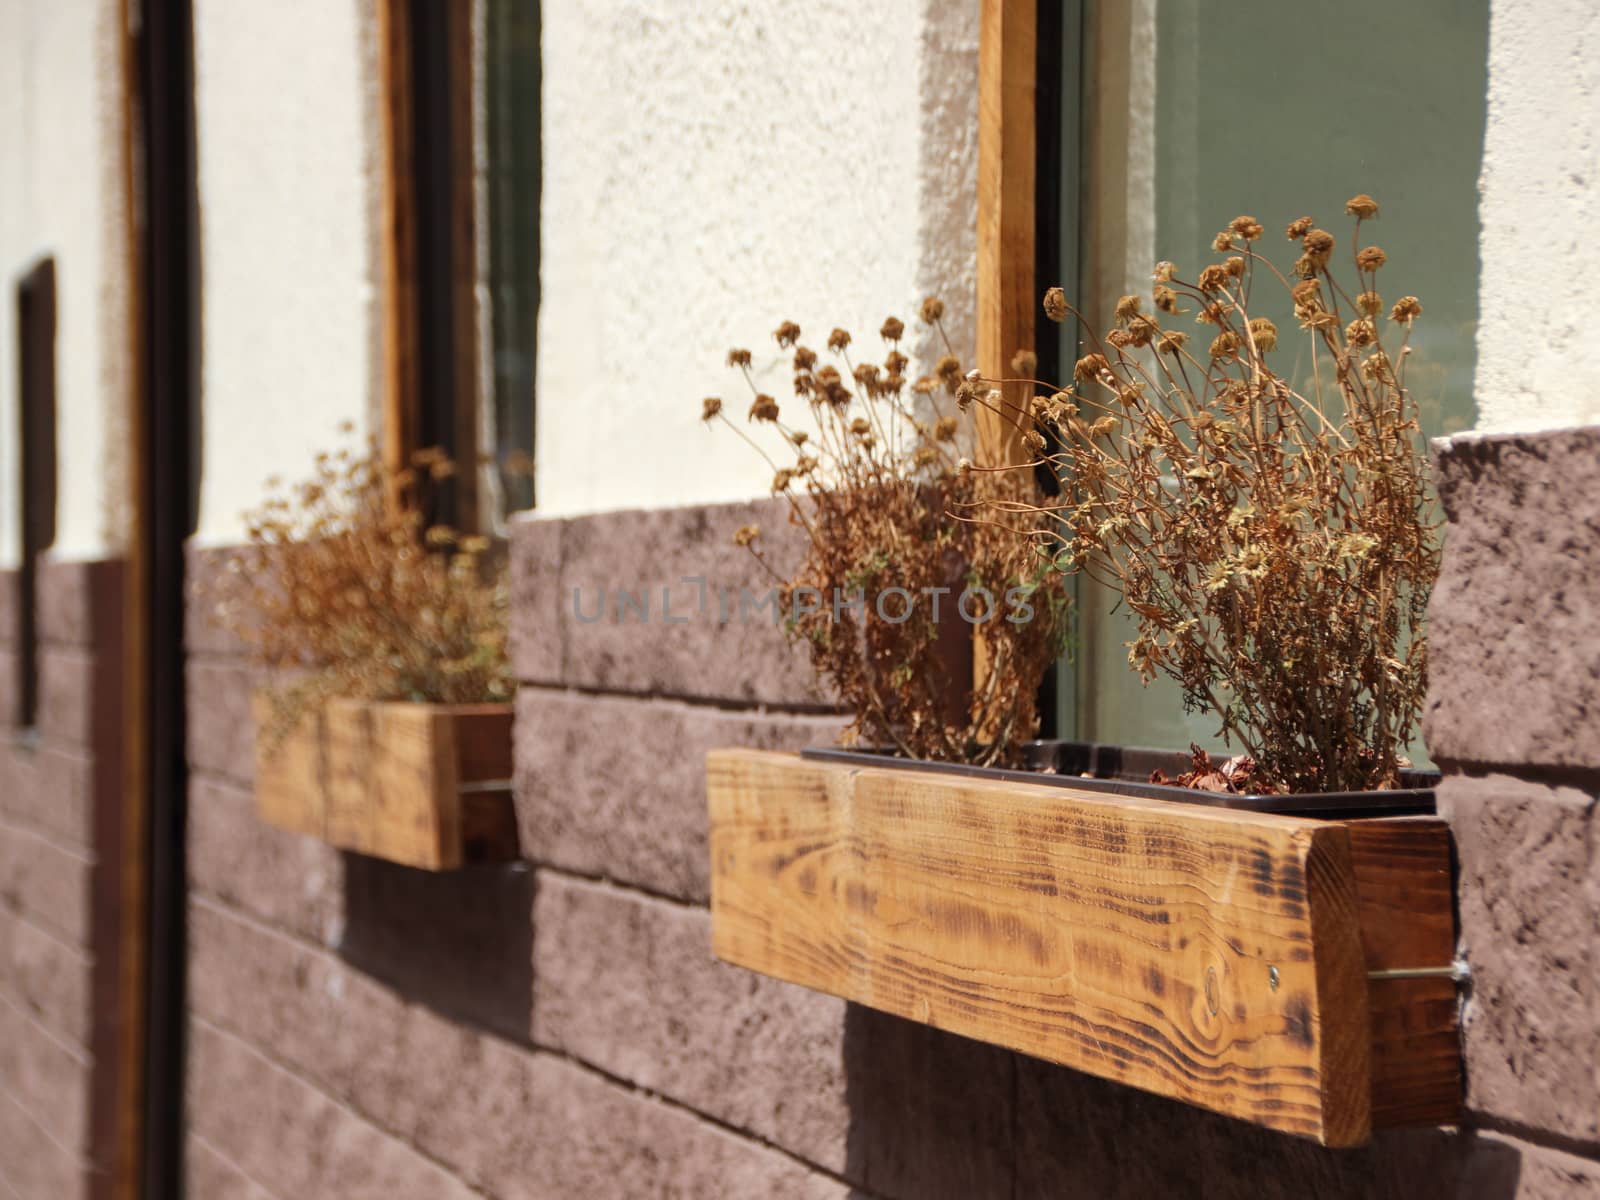 Dead Dry Withered Flowers in Window Box on Wall by HoleInTheBox